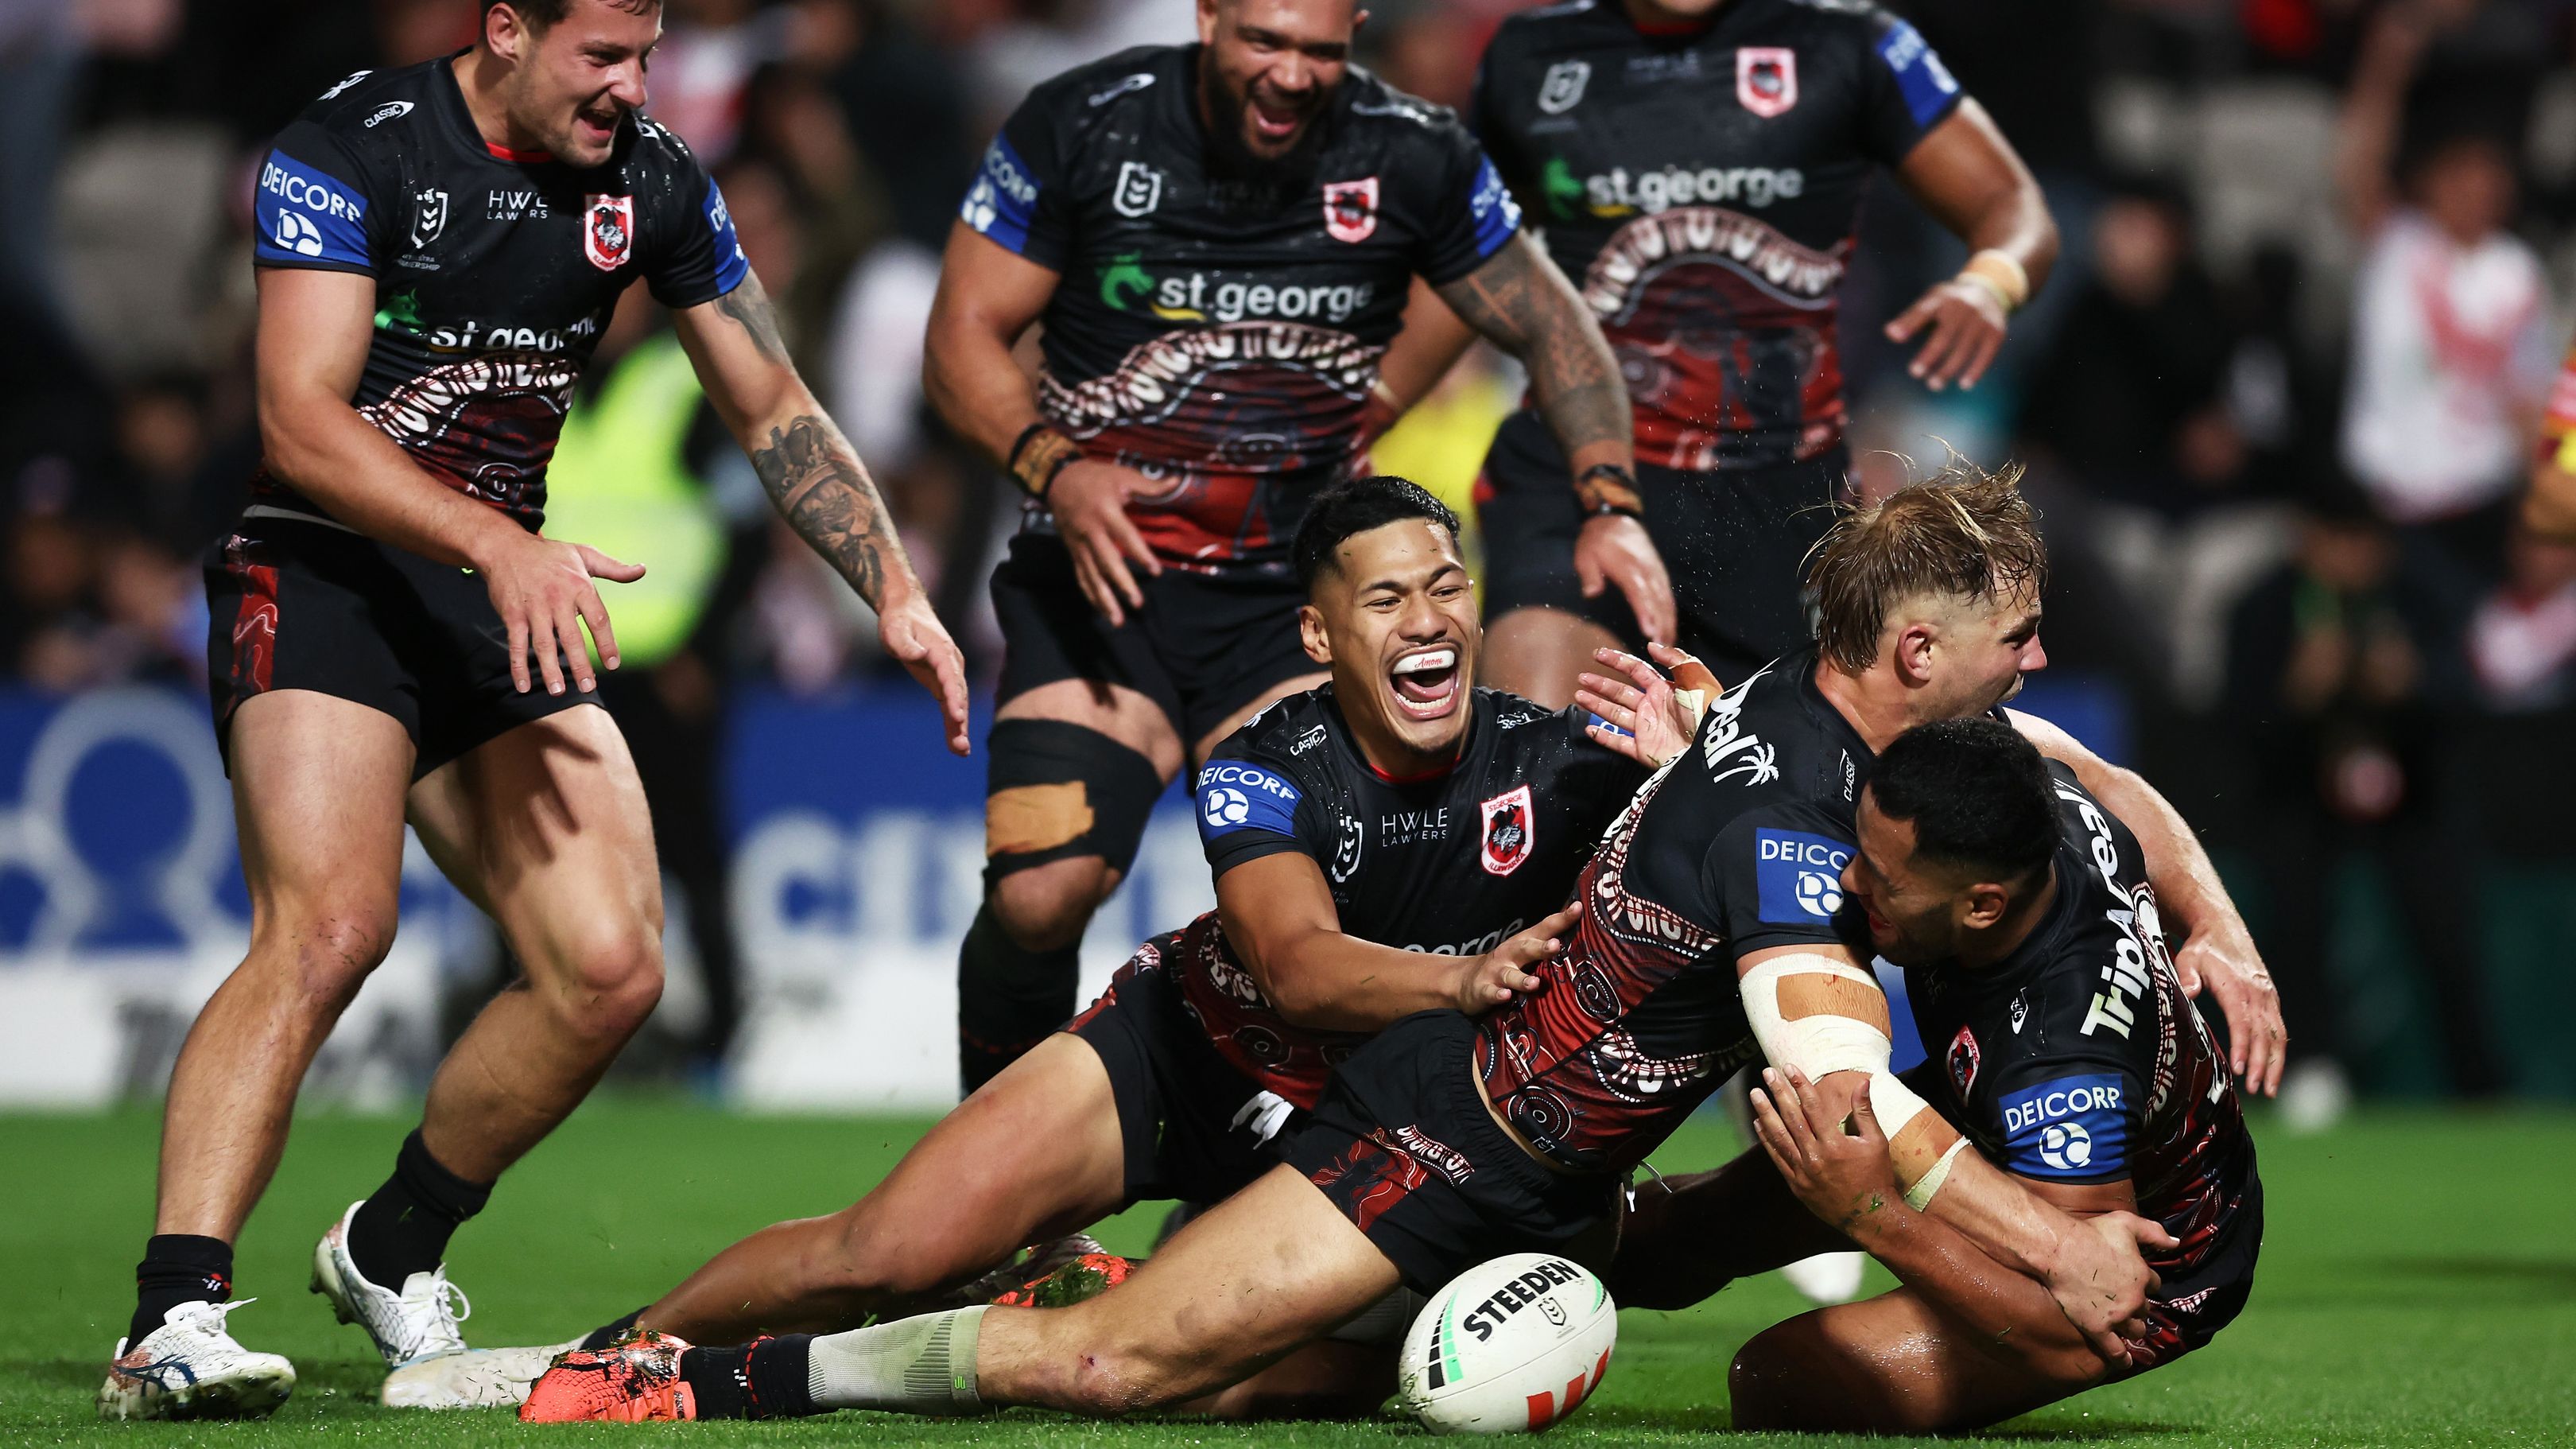 Mathew Feagai celebrates with his Dragons teammates after scoring the match-winning try against the Roosters.